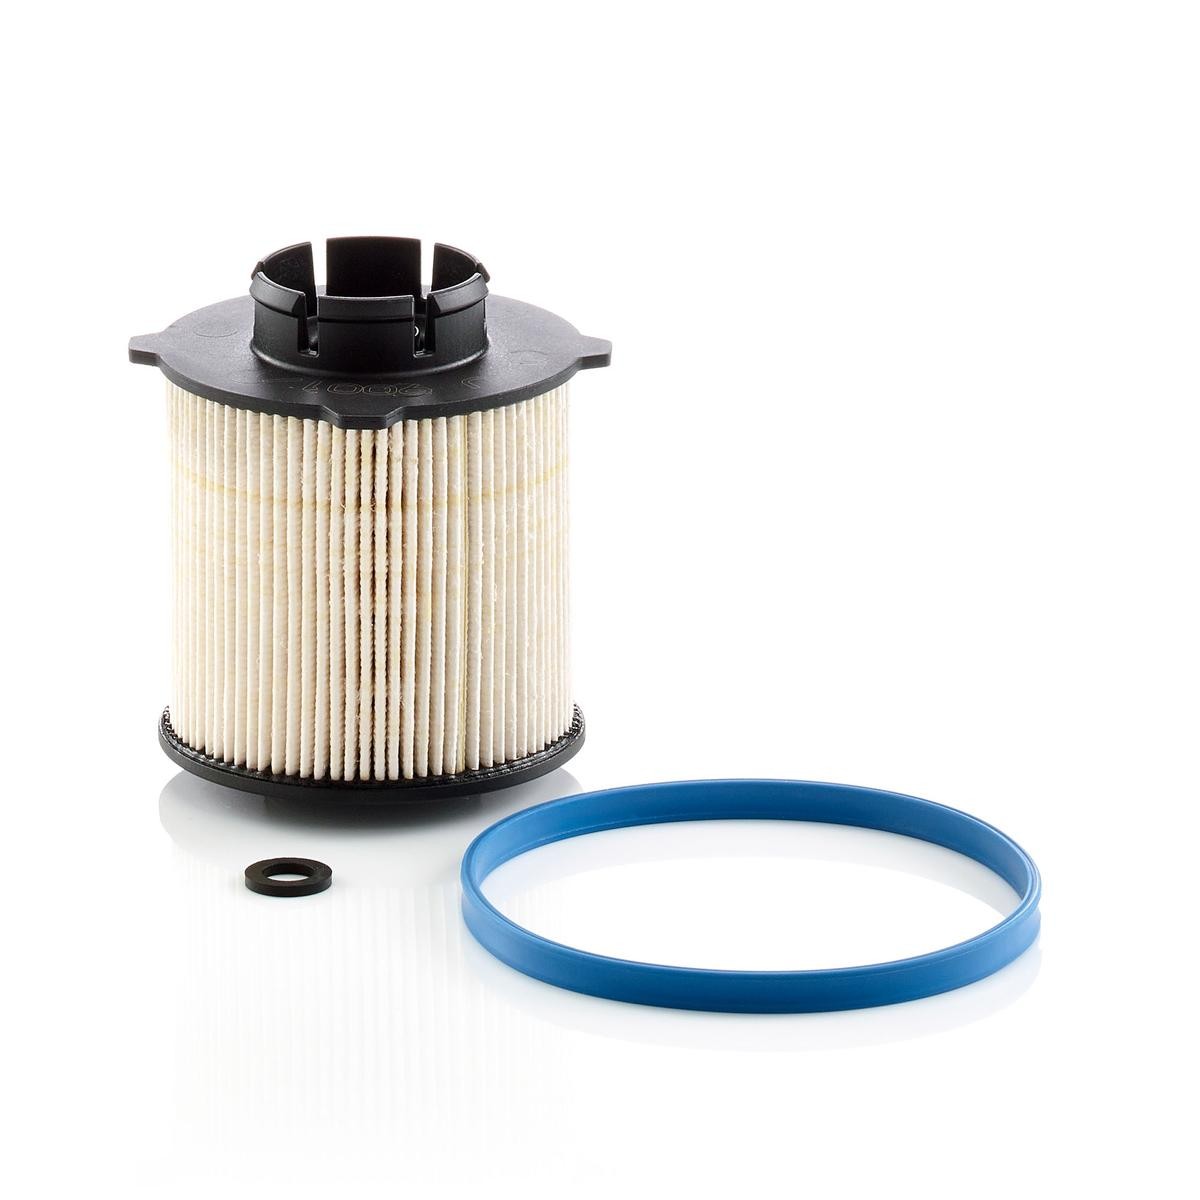 Opel INSIGNIA Fuel injection parts - Fuel filter MANN-FILTER PU 9001/1 x